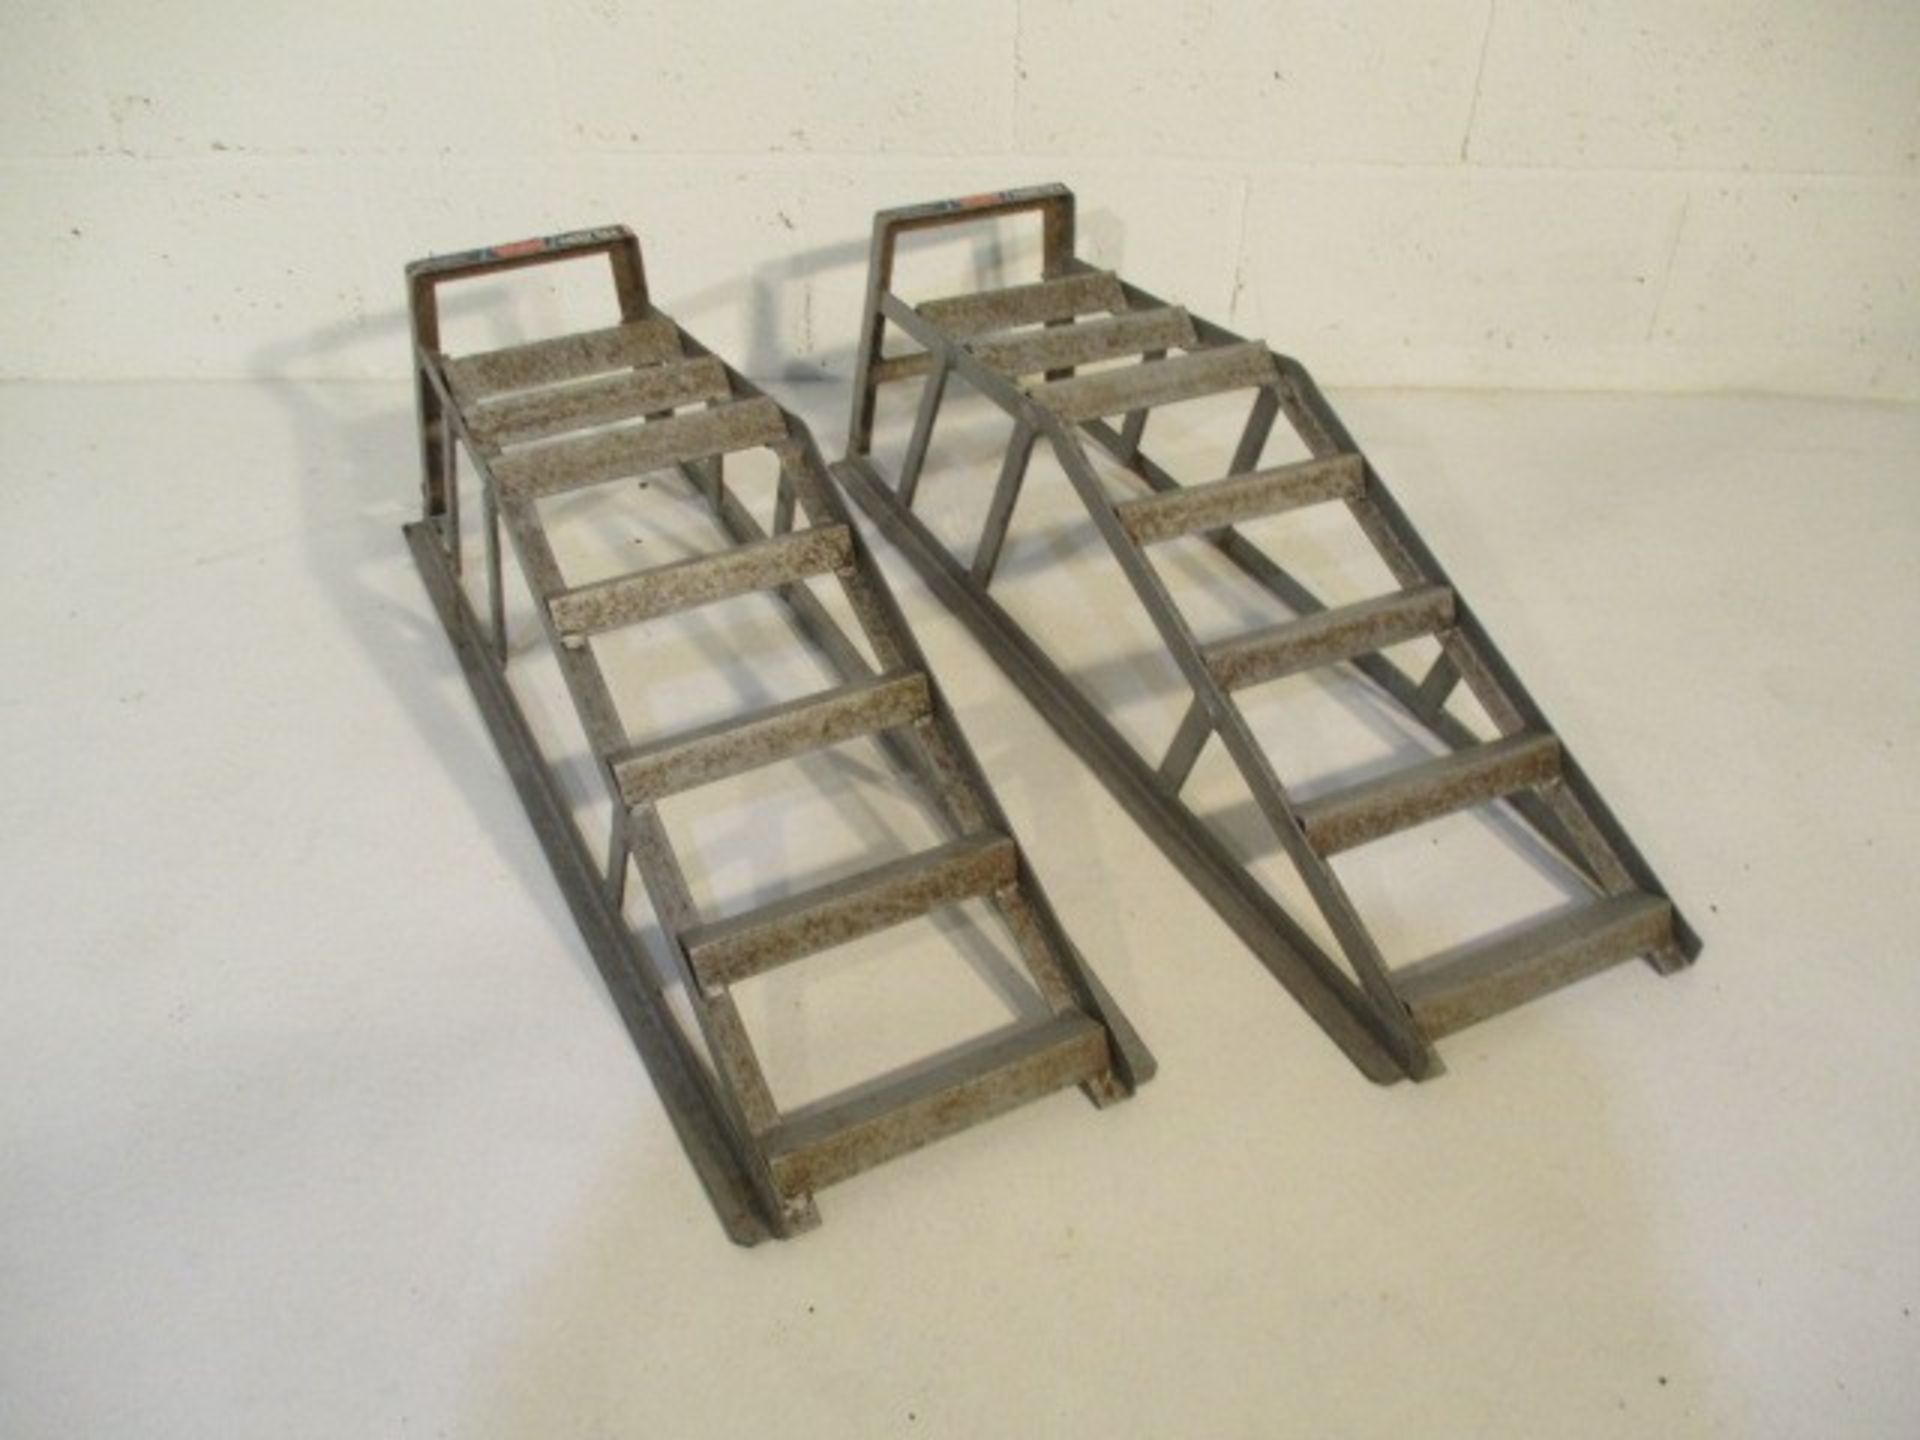 A pair of Master Mechanic SWL100KG car ramps